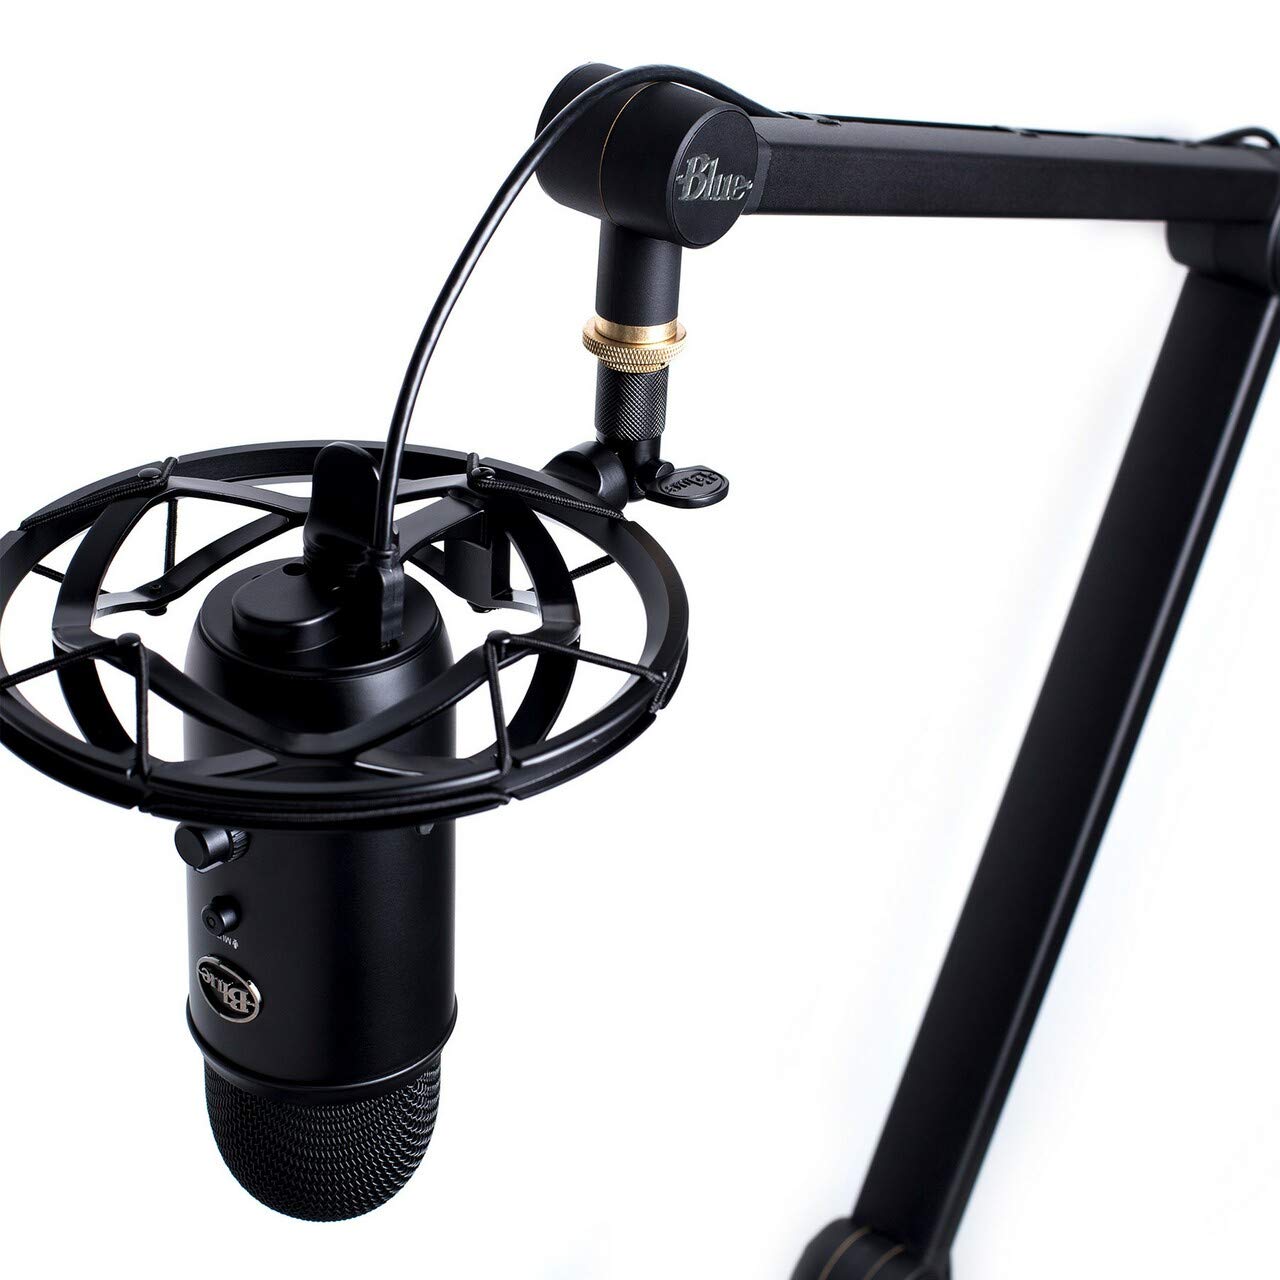 BLUE Yeticaster Pro Streaming Bundle with Yeti USB Microphone, Radius III and Compass